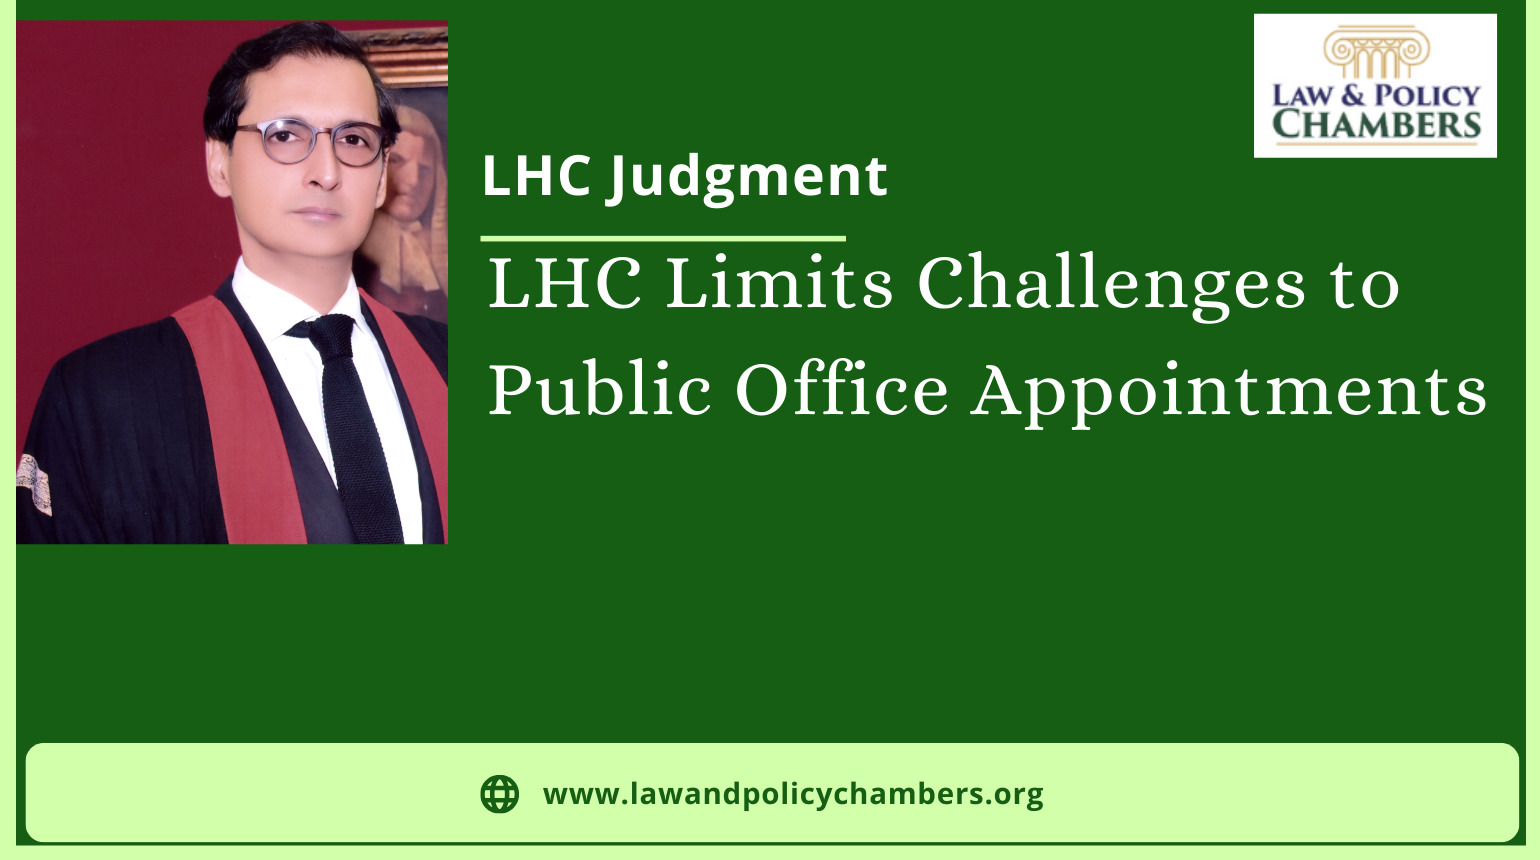 LHC limits challenges to public office appointments.